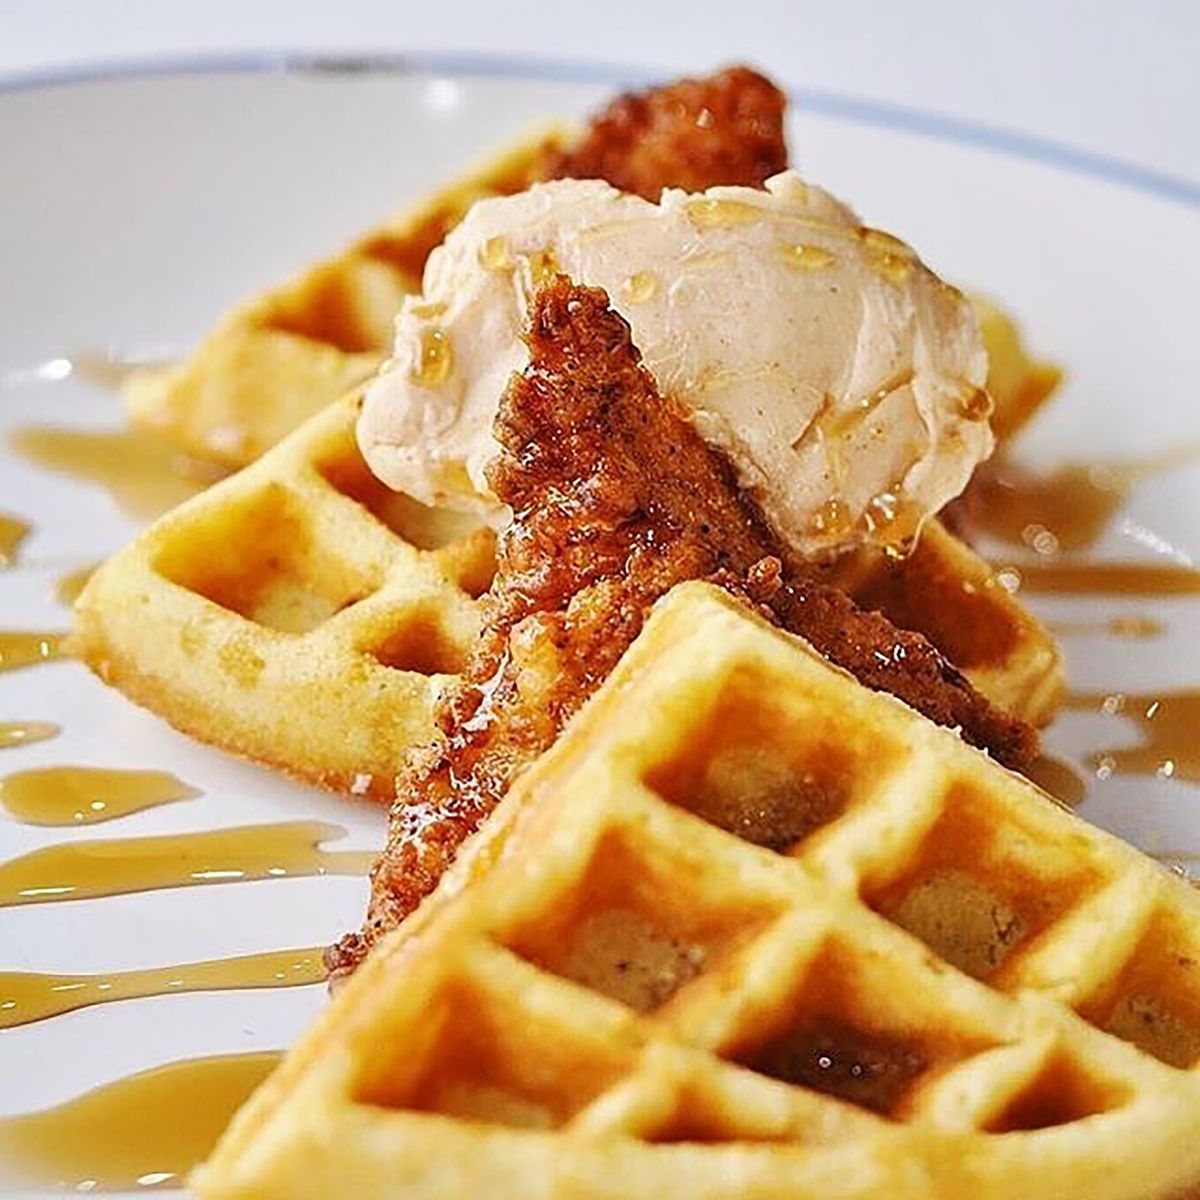 Chicken and waffles with cinnamon honey butter and maple syrup.